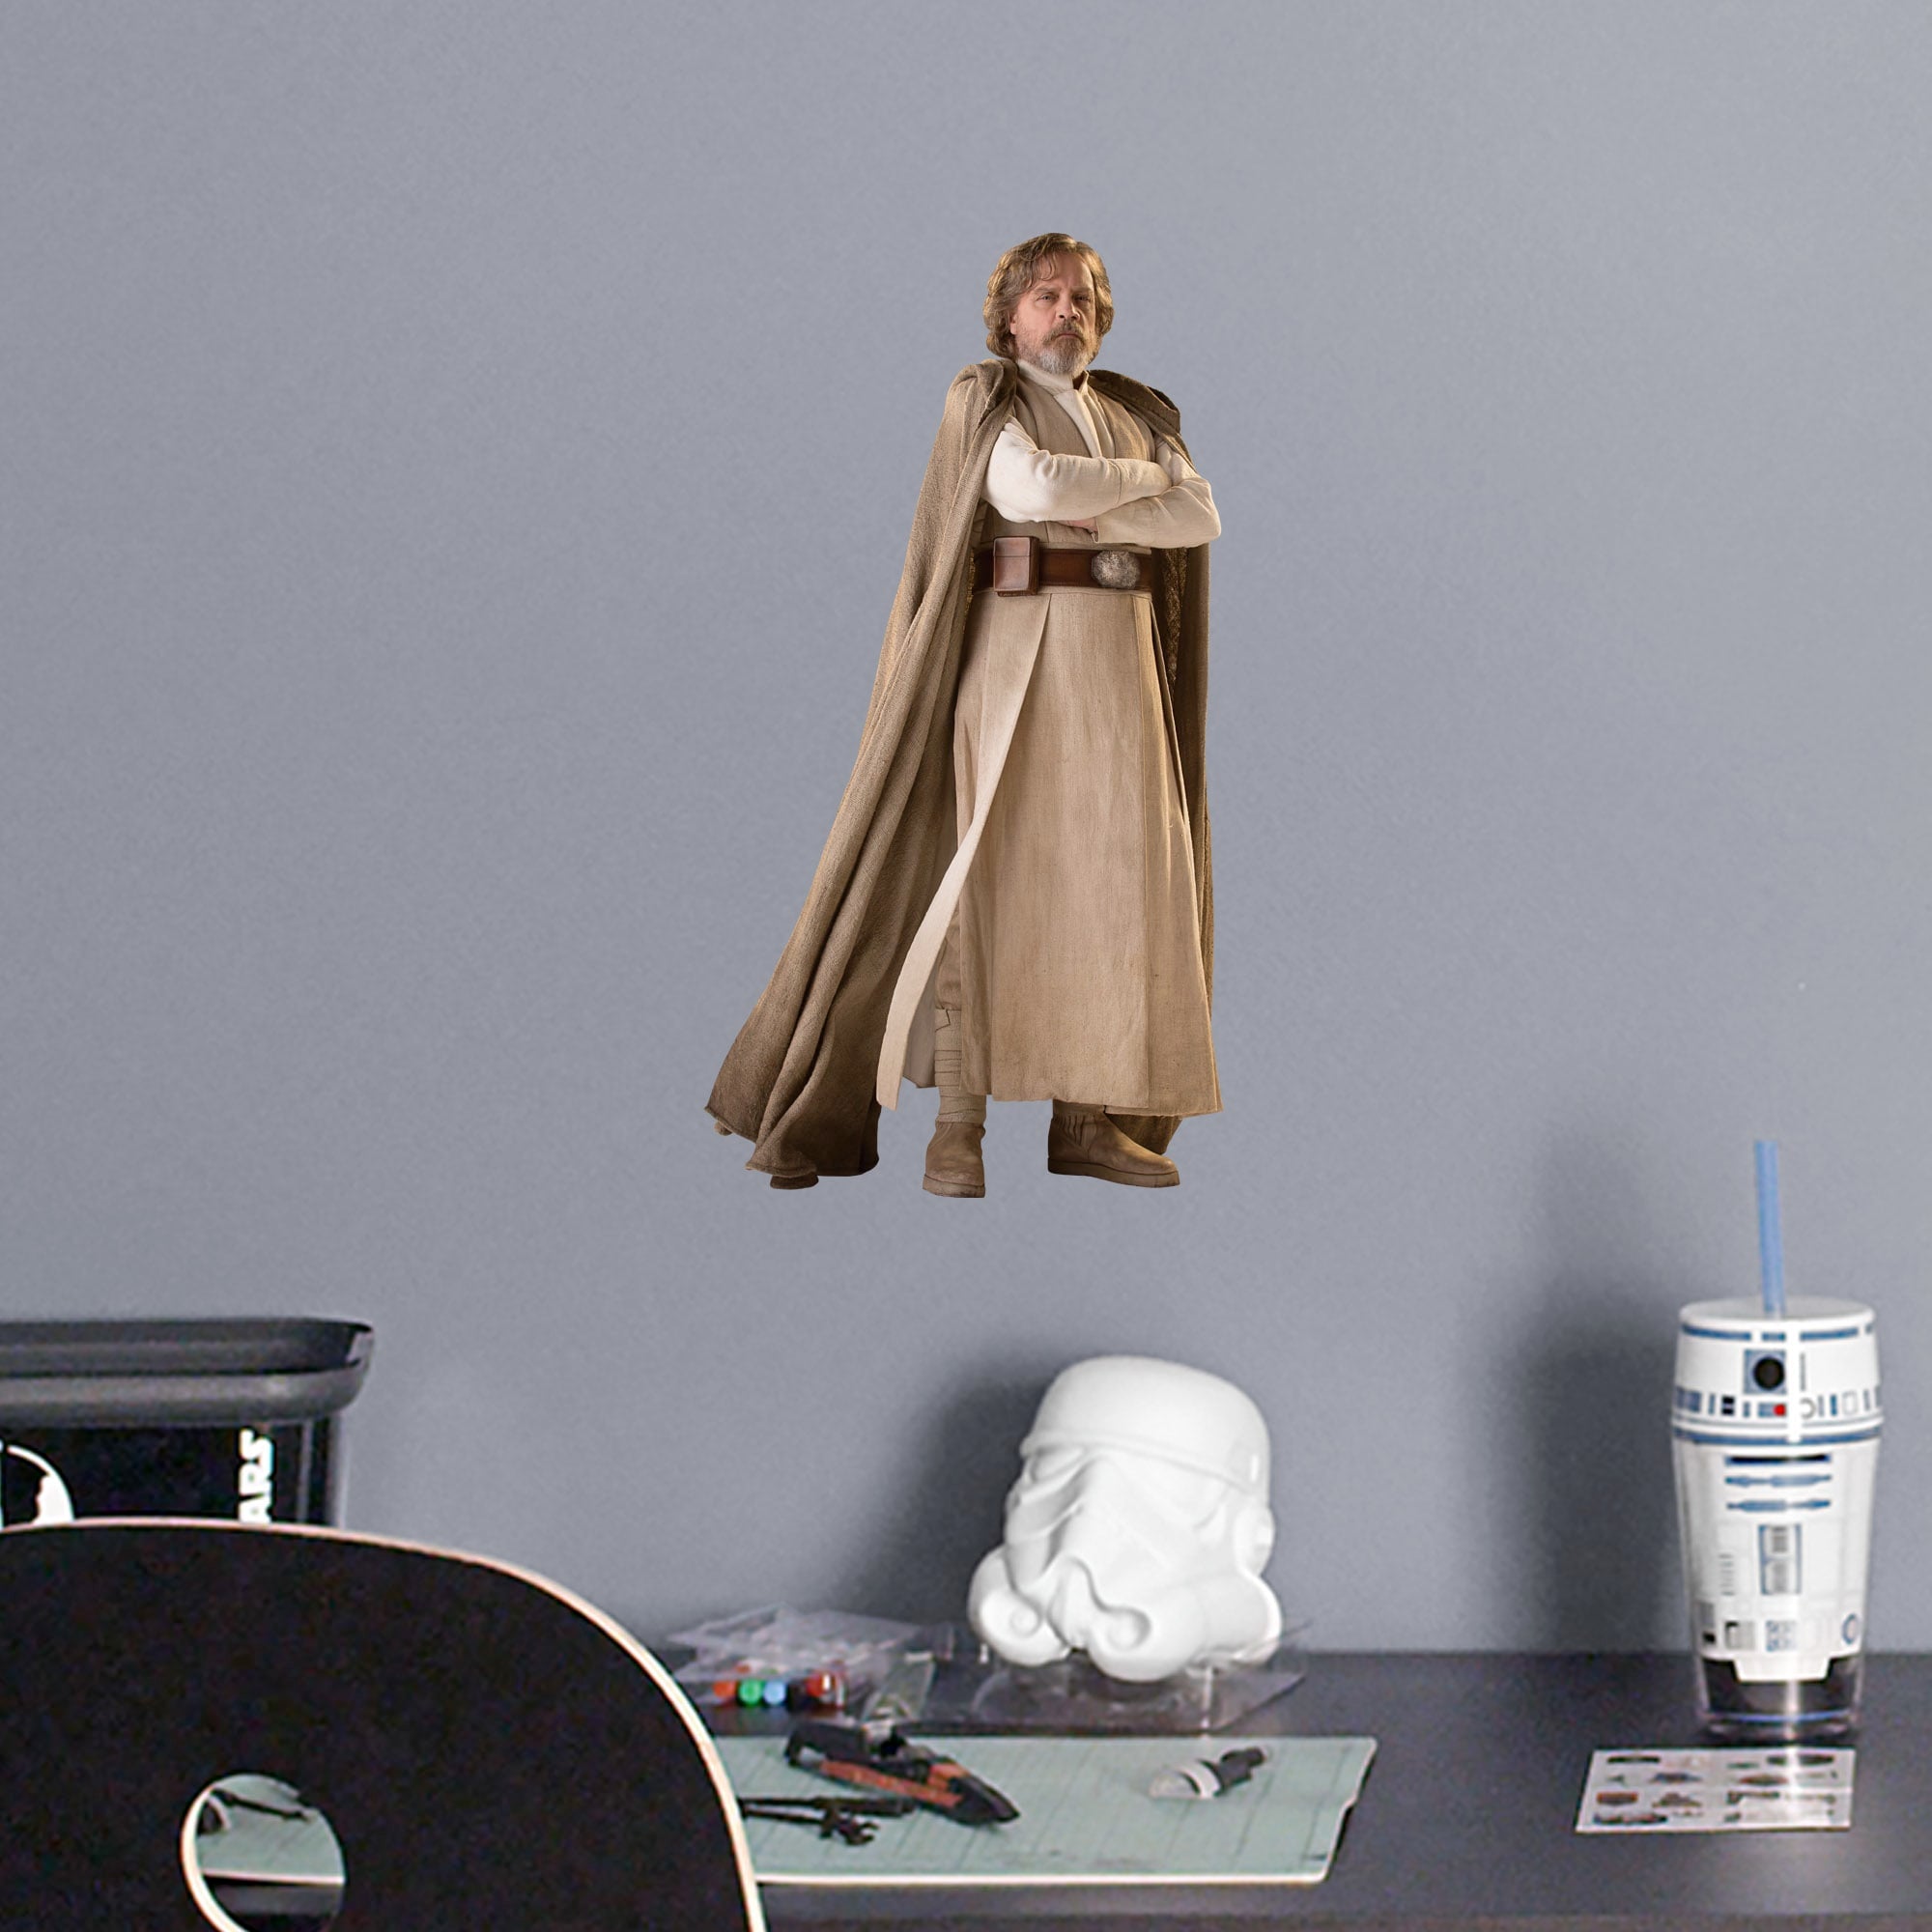 Luke Skywalker: Jedi Master - Officially Licensed Removable Wall Decal Large by Fathead | Vinyl